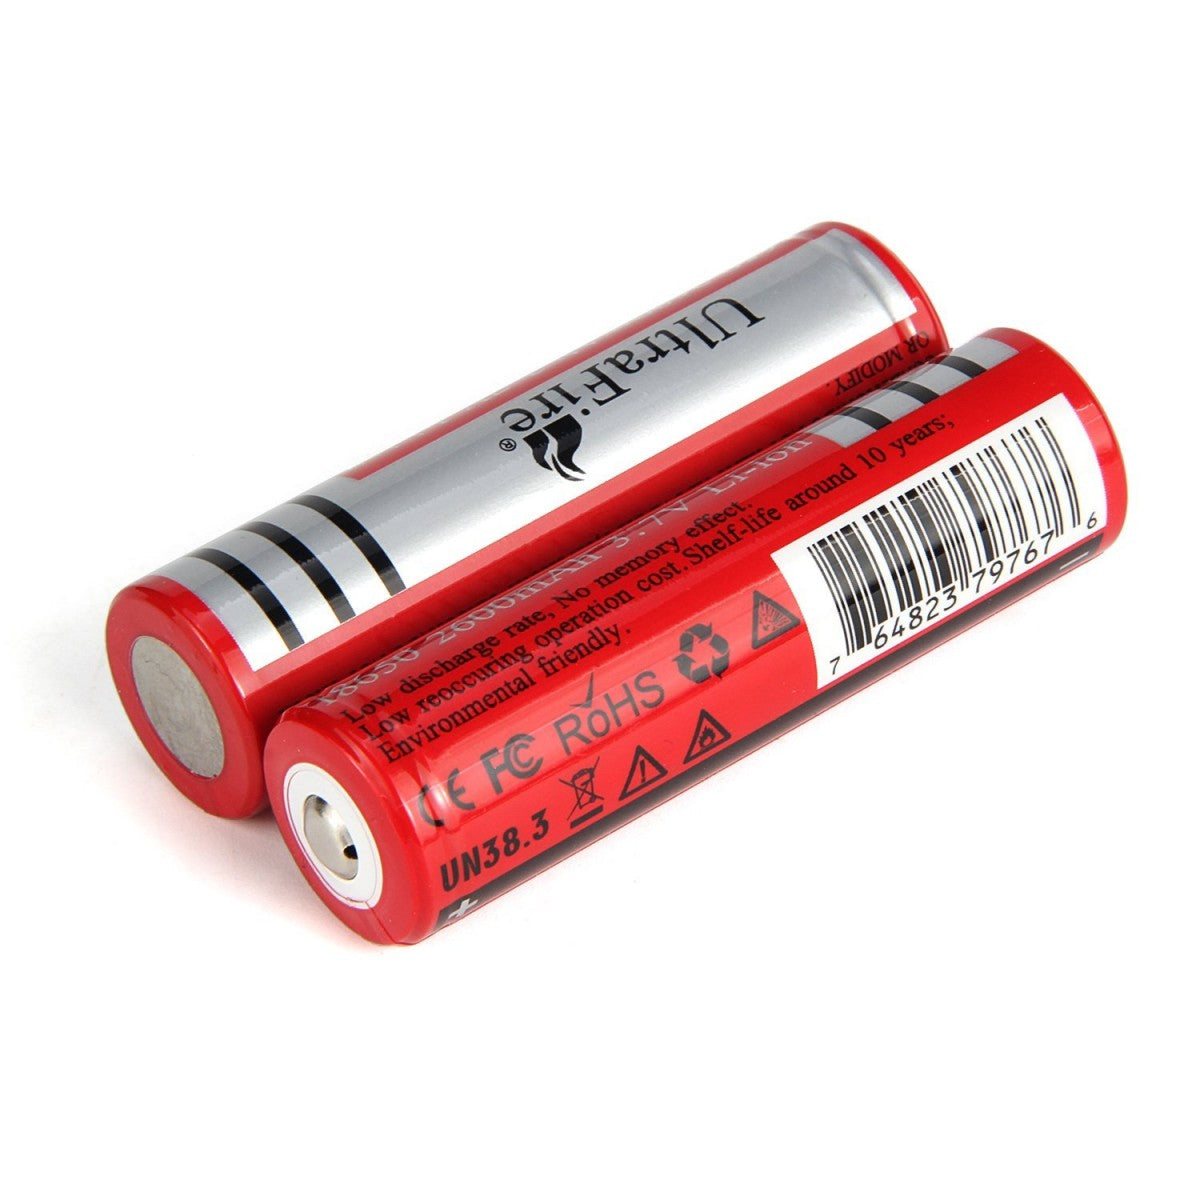 UltraFire 3.7V 18650 Rechargeable Lithium Battery With Pro